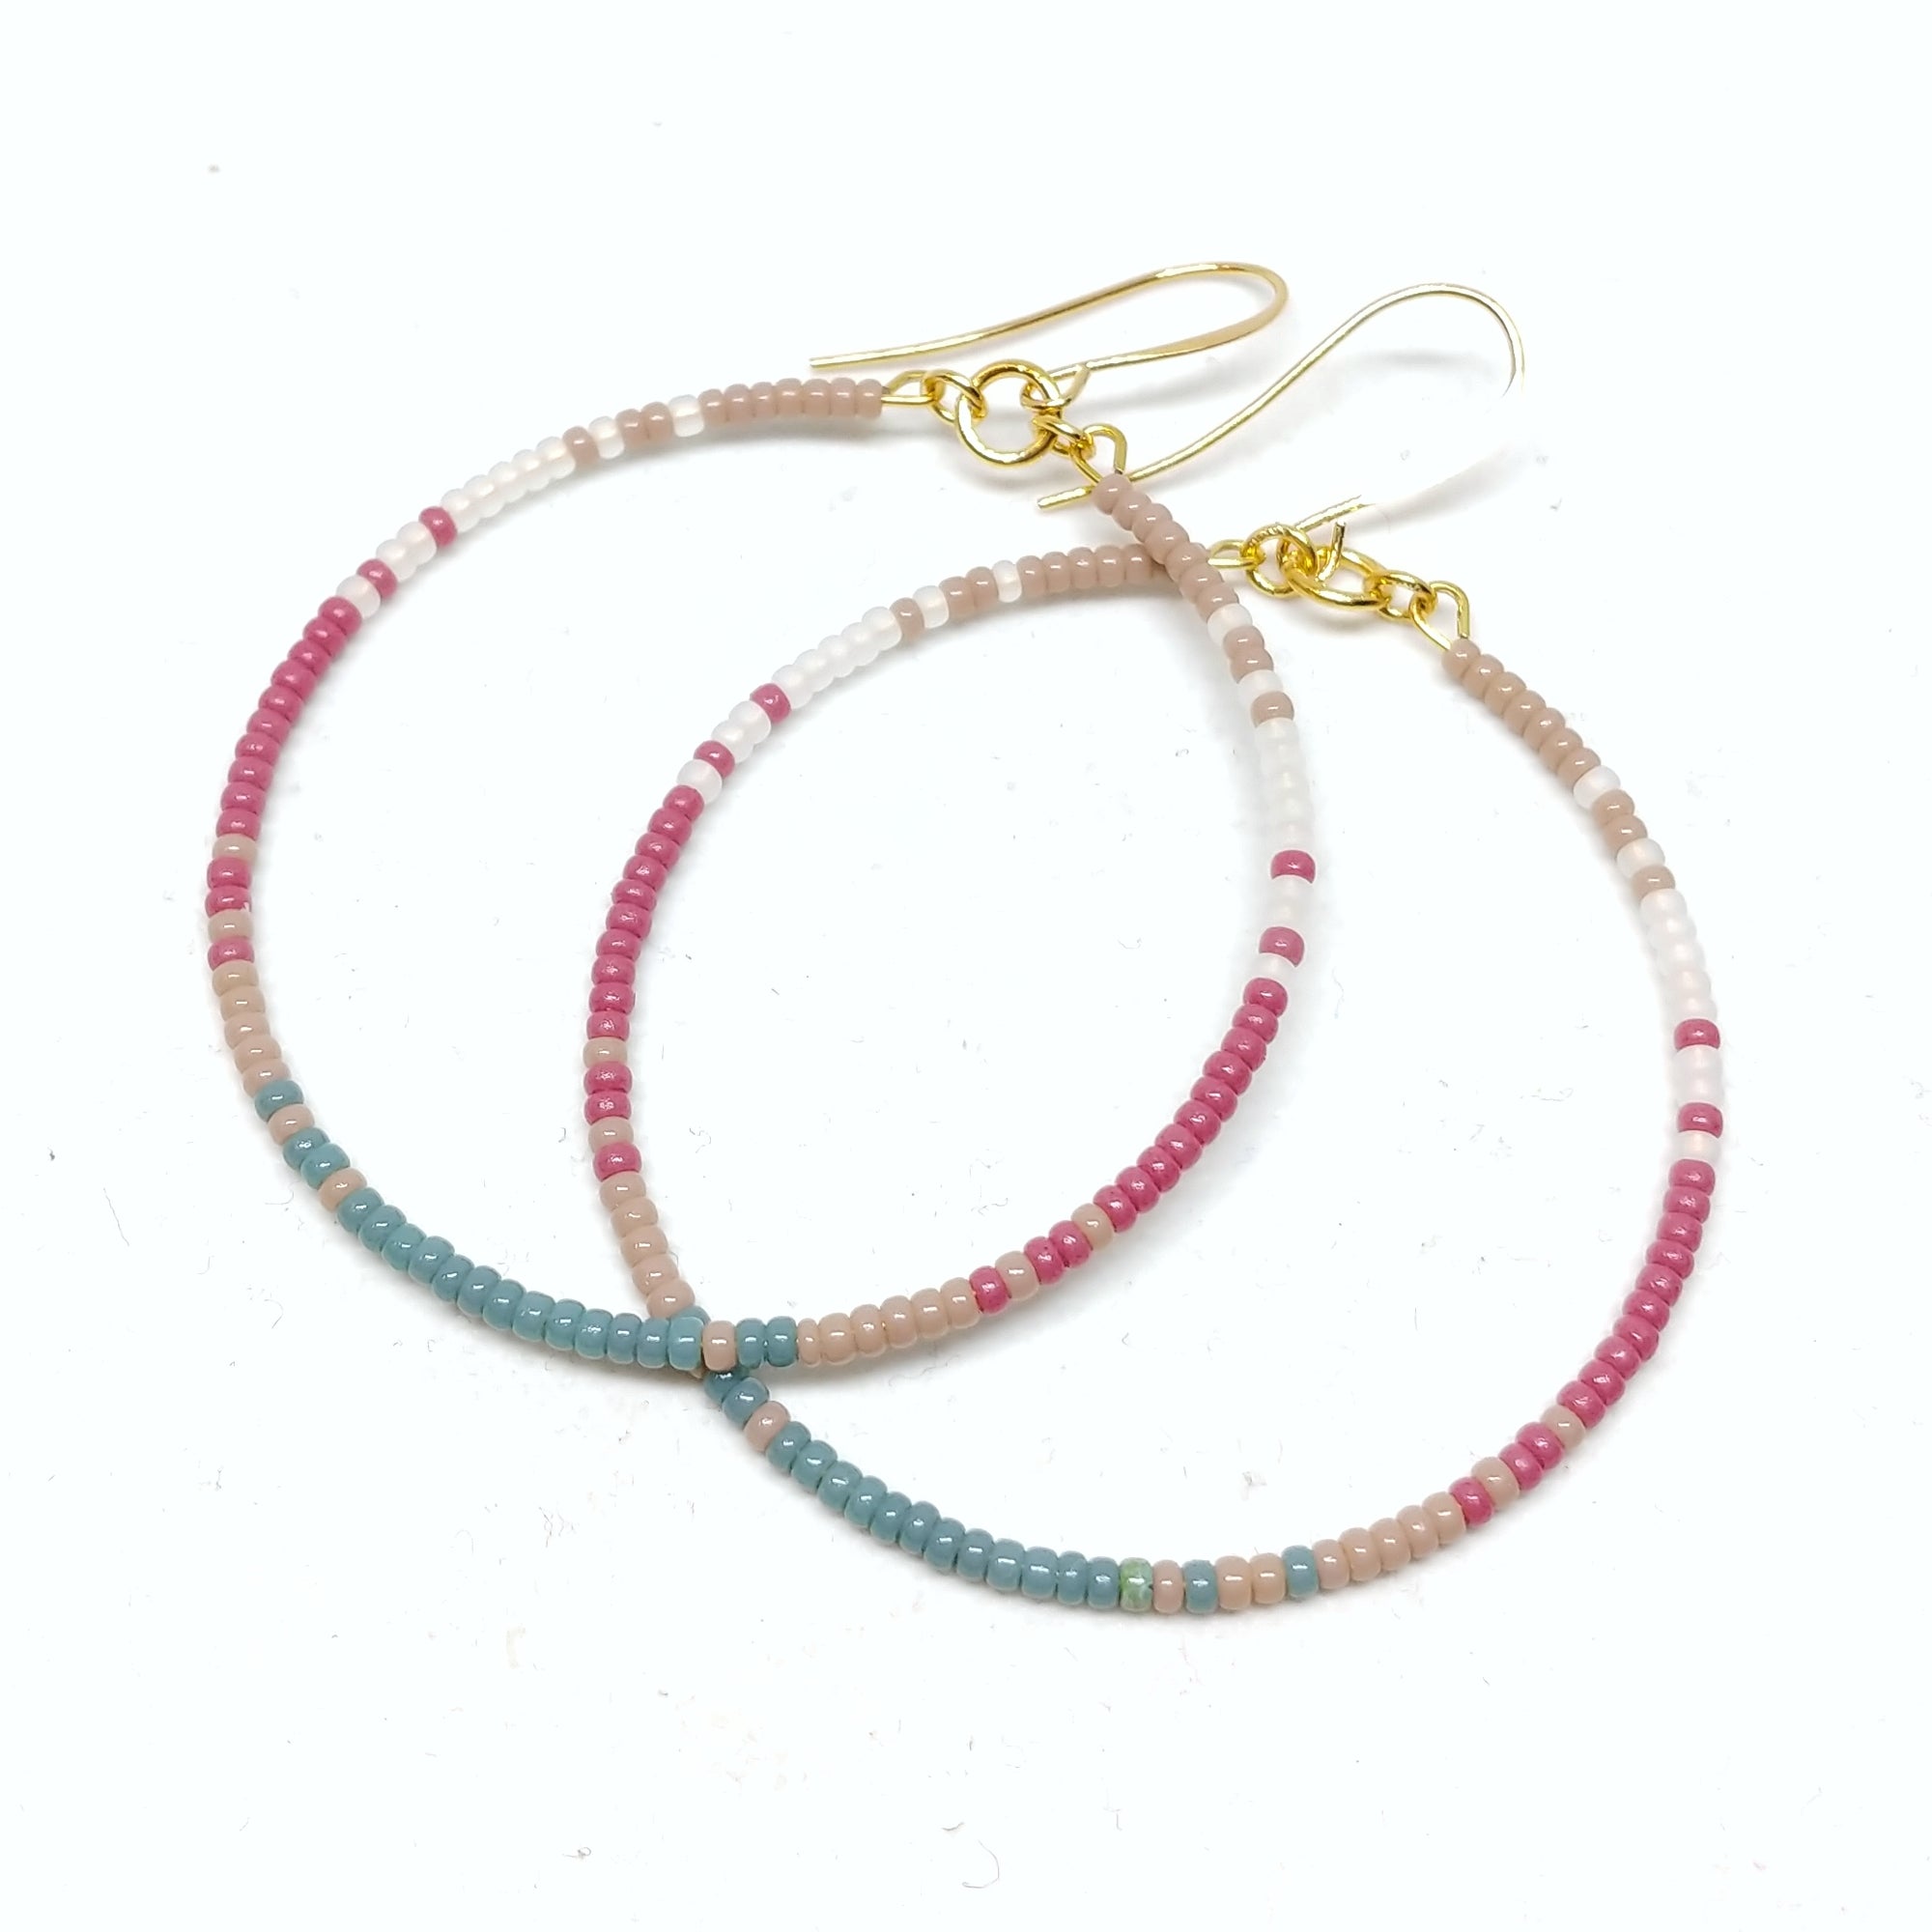 Gratitude Hoops: Gold plated ear wires and featuring seed beads in beige, white, mulberry and cyan.